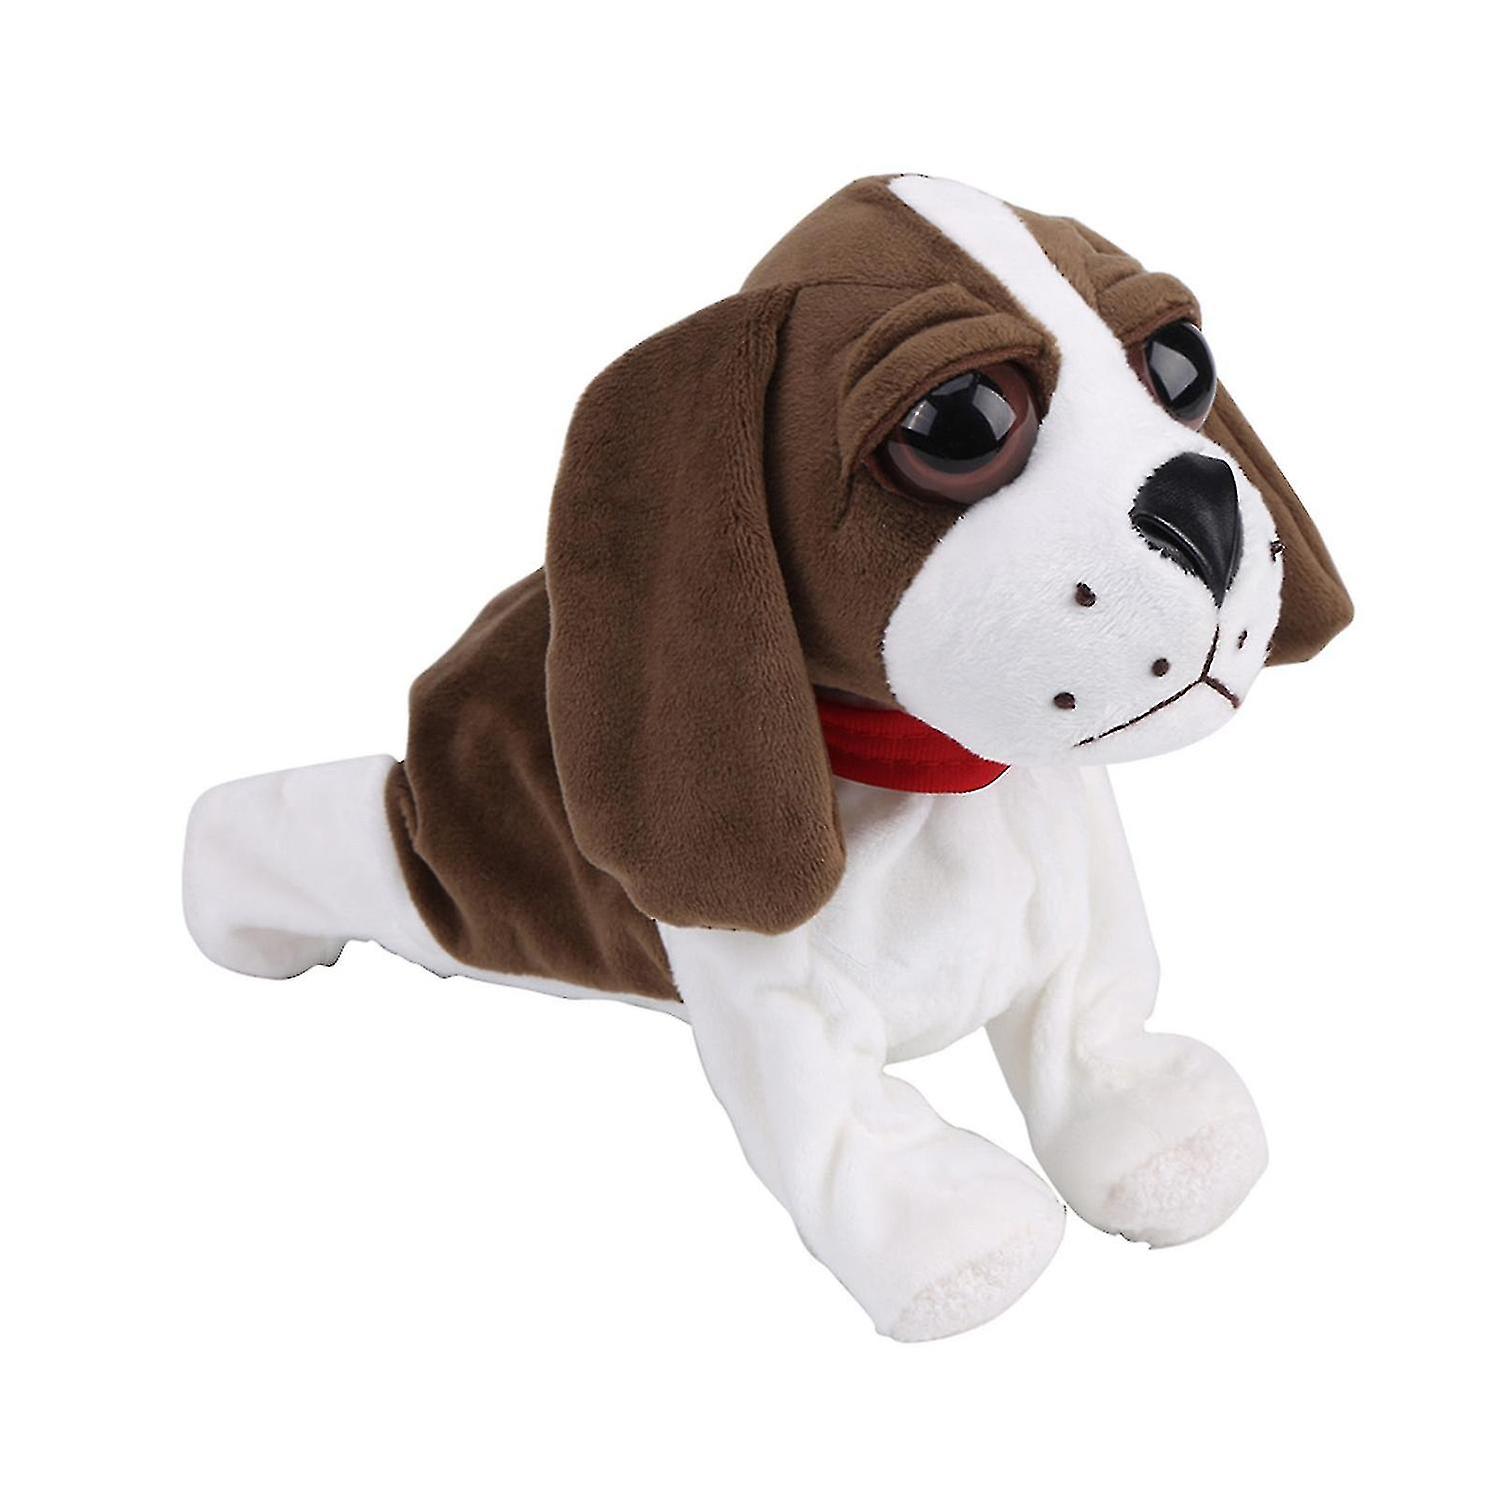 Lovely Plush Electronic Dog Pets Sound Control Kids Interactive Toy Christmas Gift